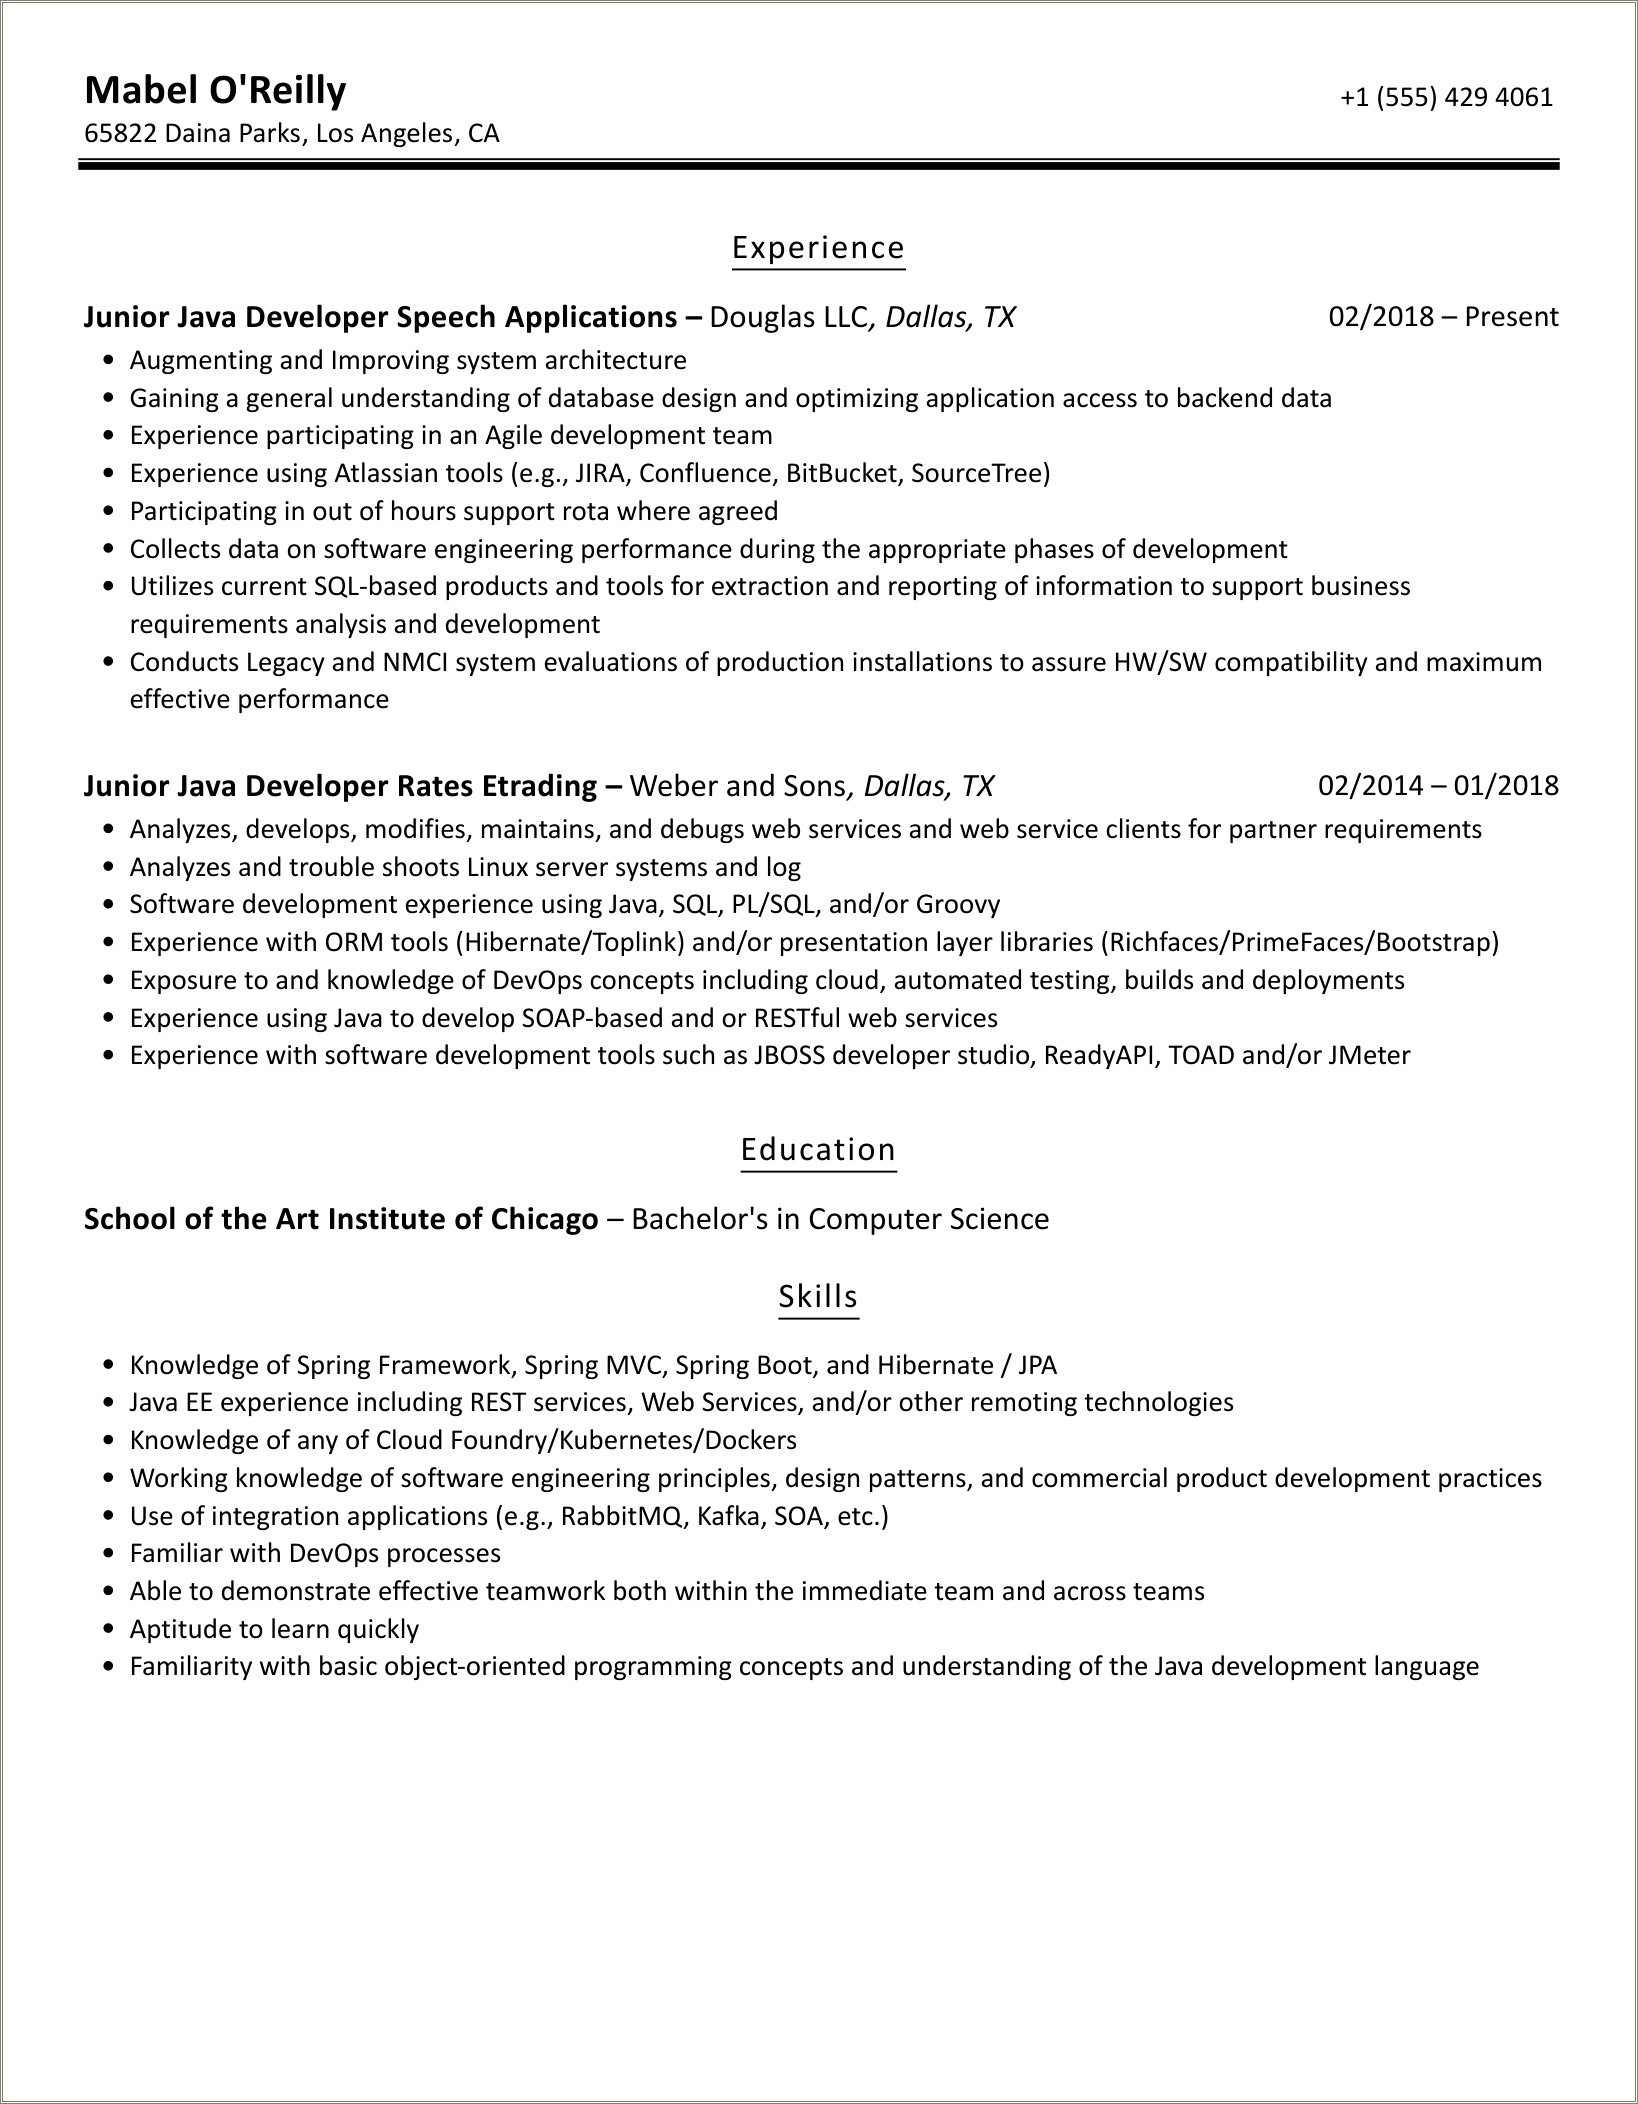 One Year Experience Resume For Java Developer